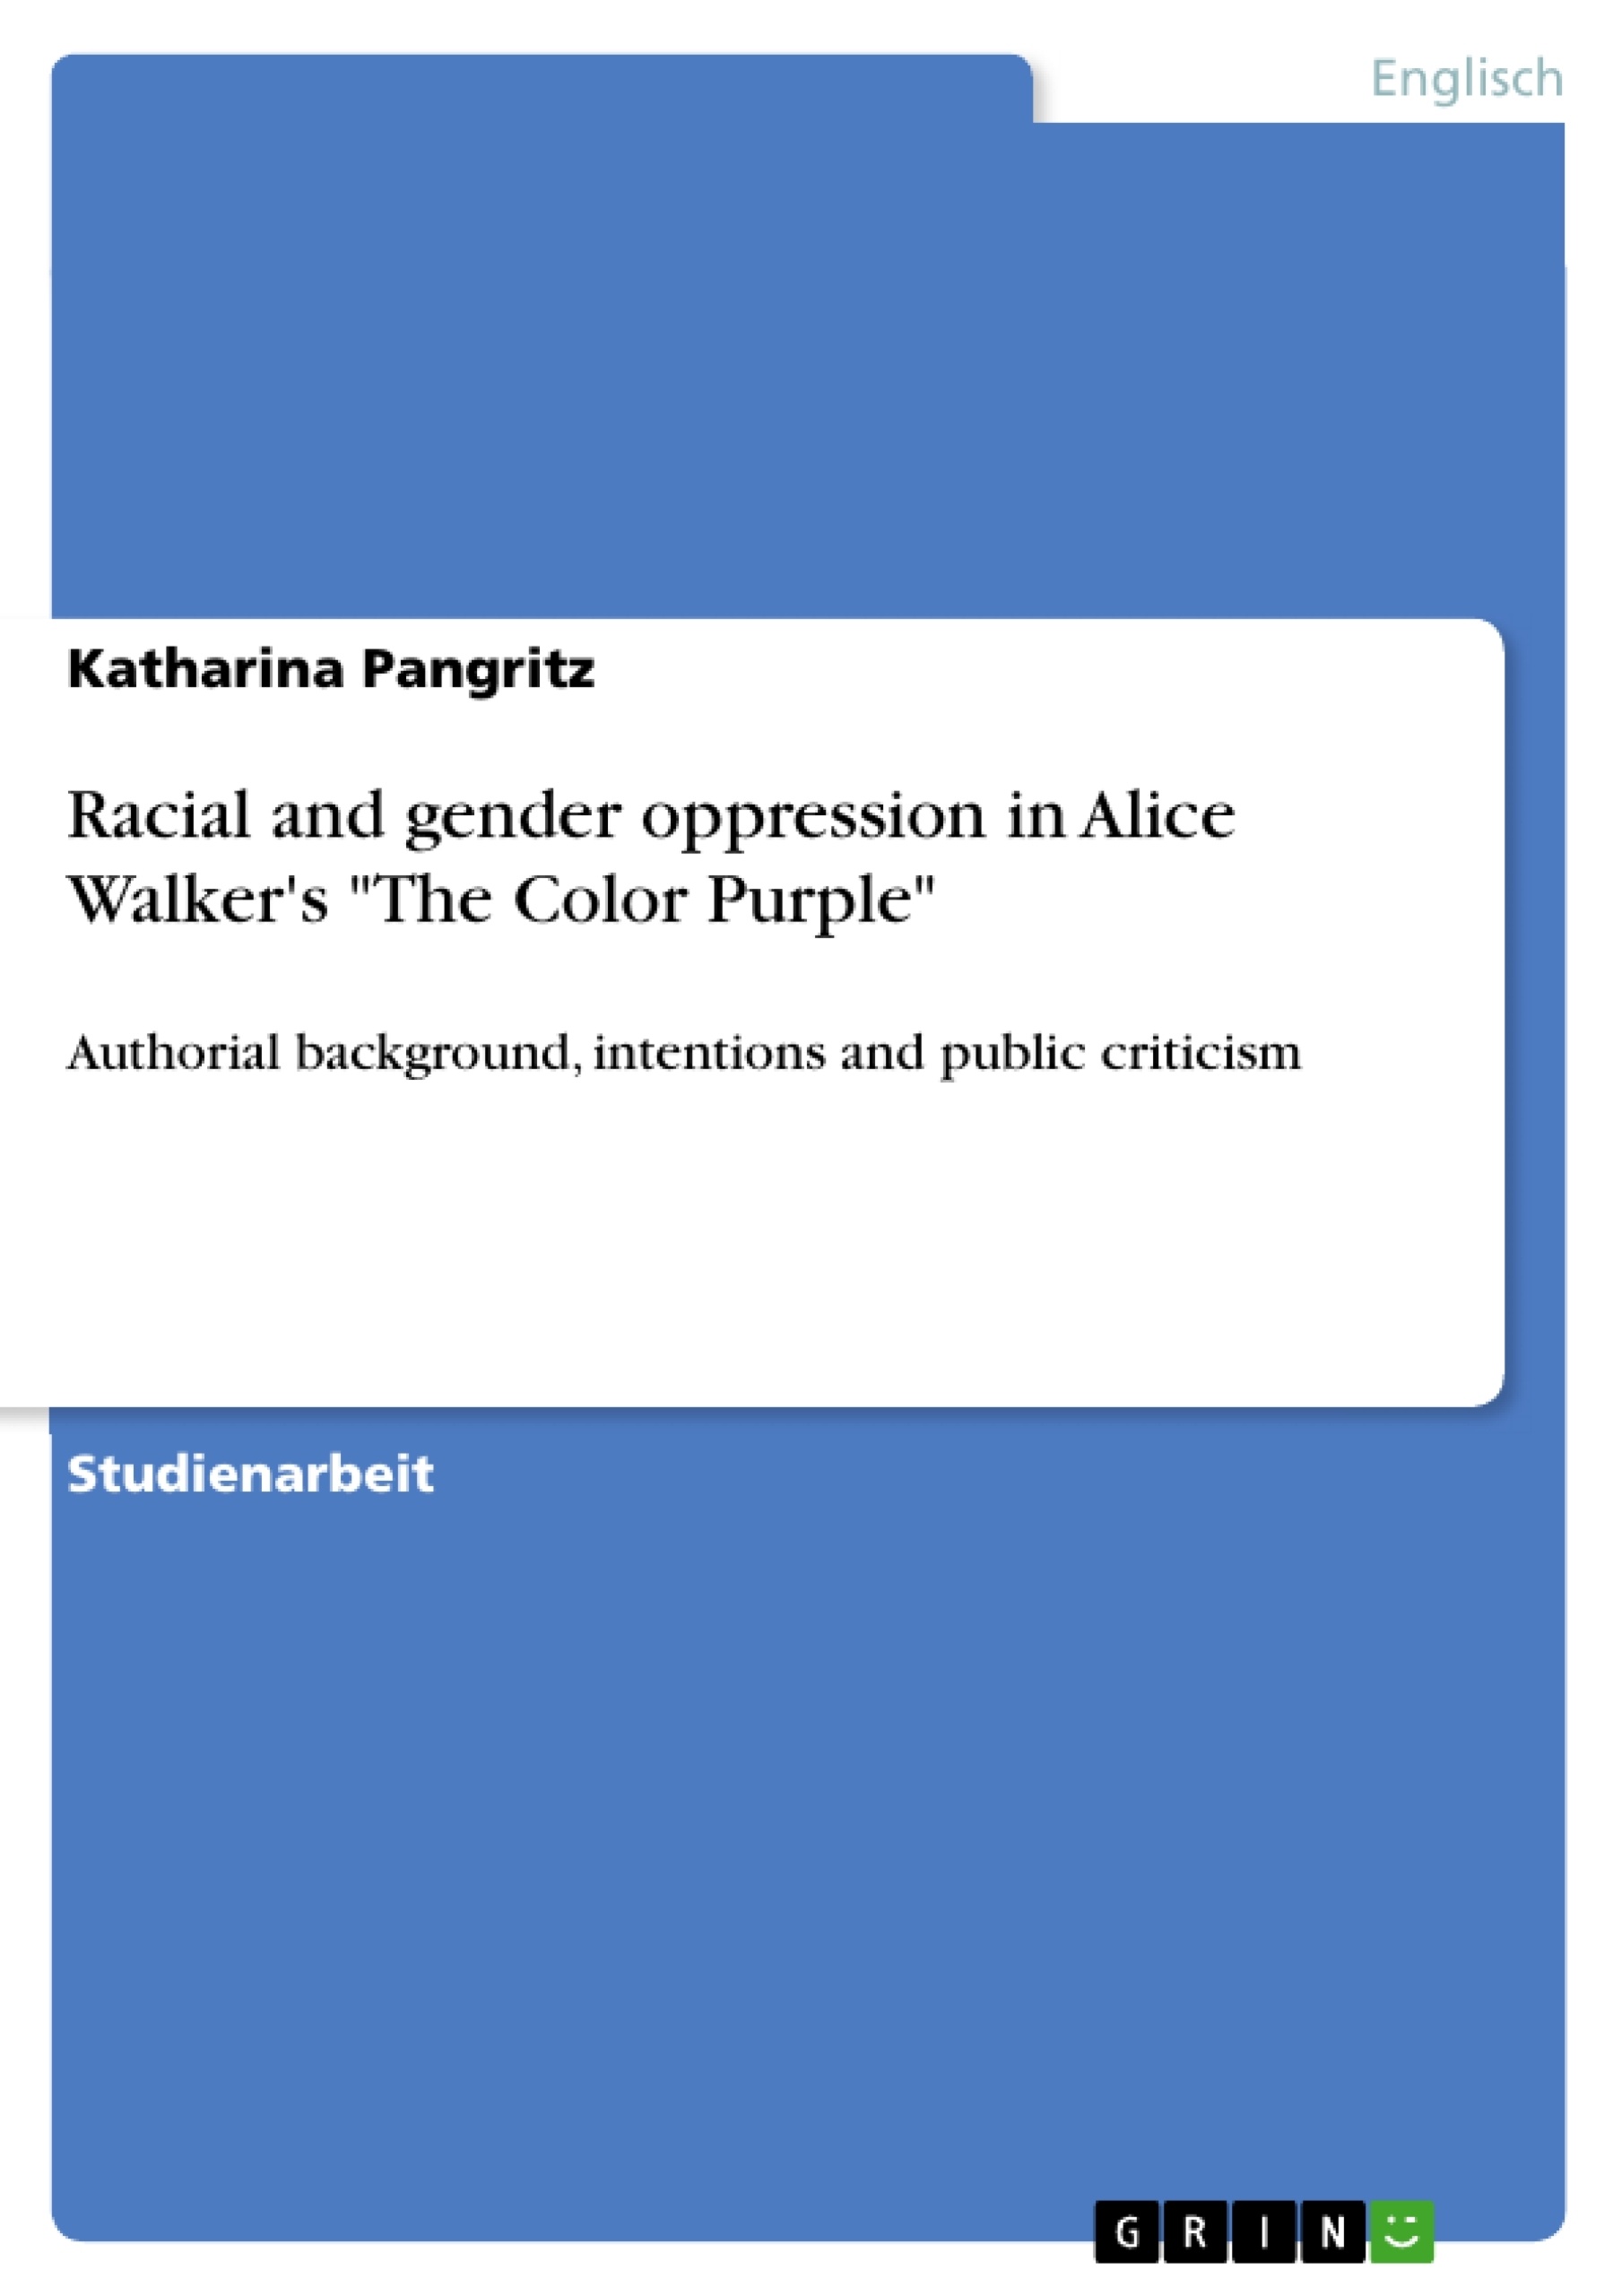 Titel: Racial and gender oppression in Alice Walker's "The Color Purple"